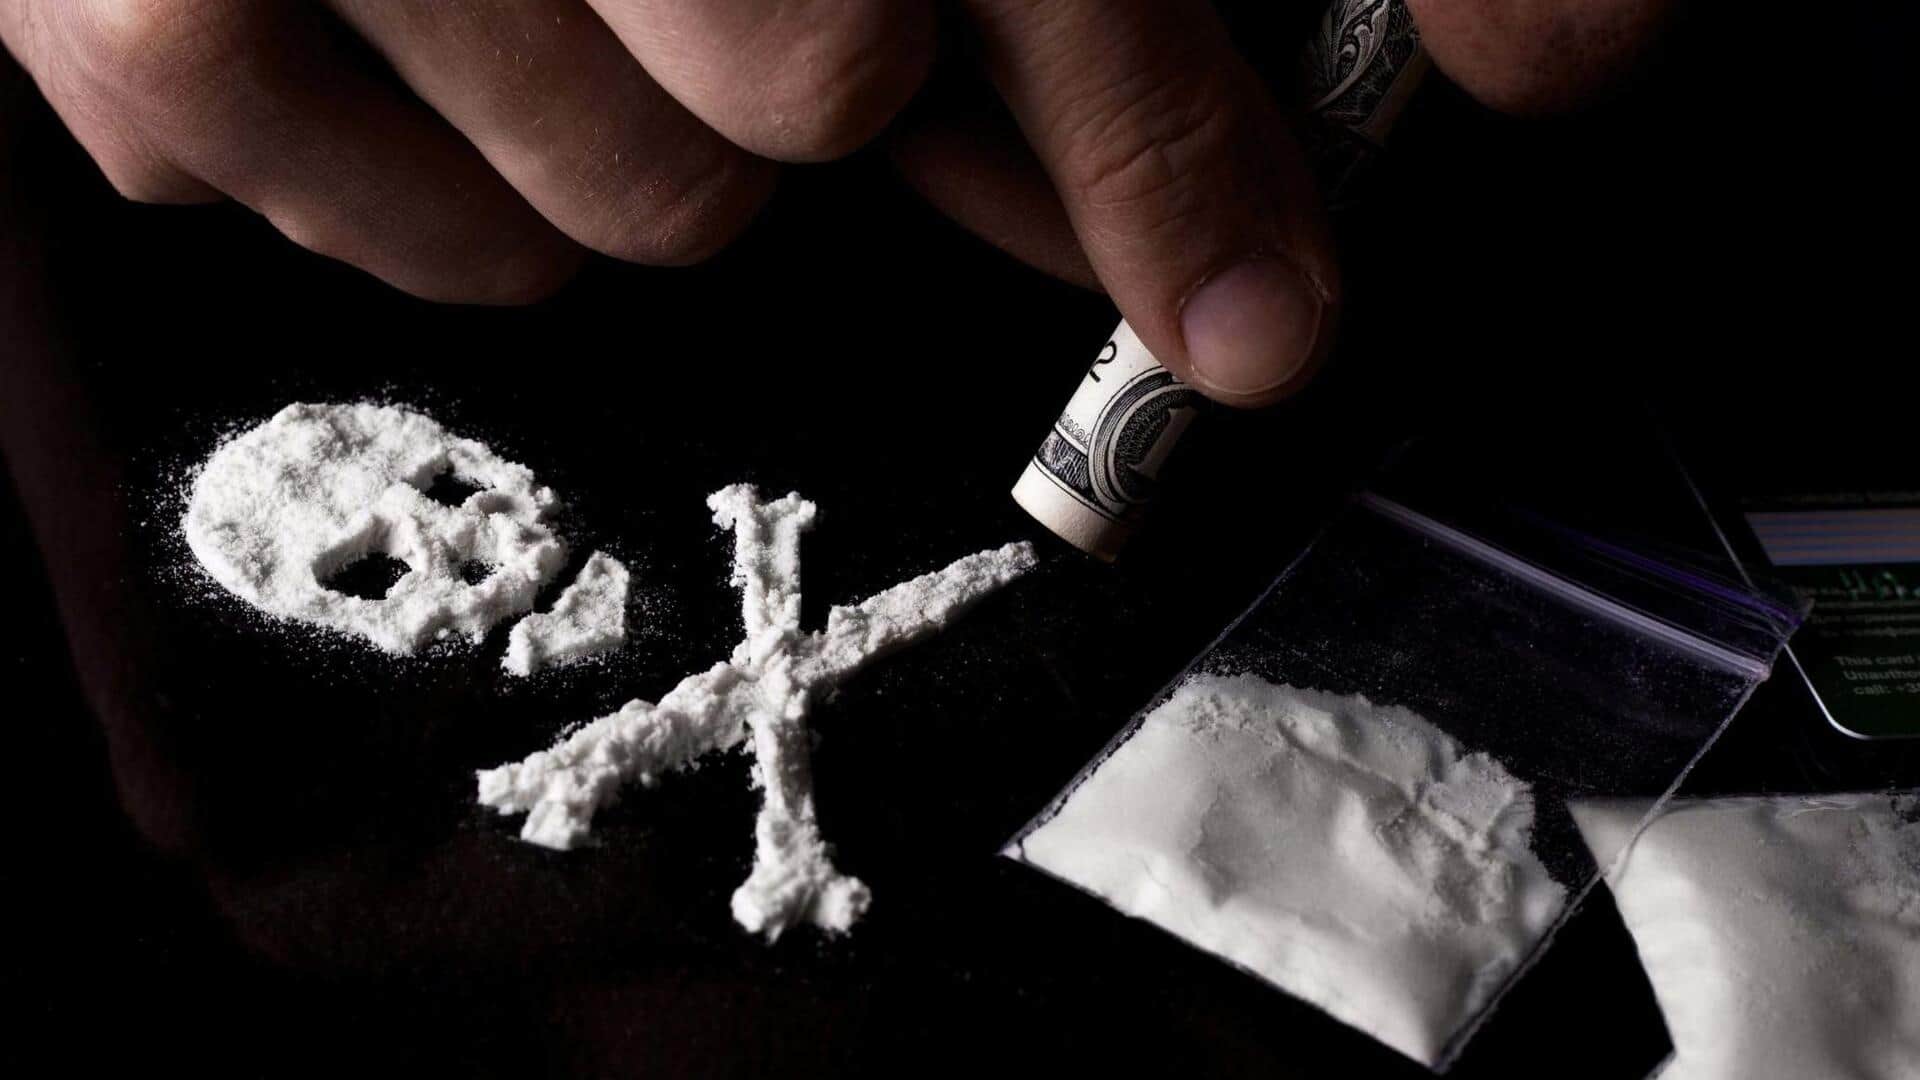 Brazilian scientists develop cocaine vaccine: Here's how it works